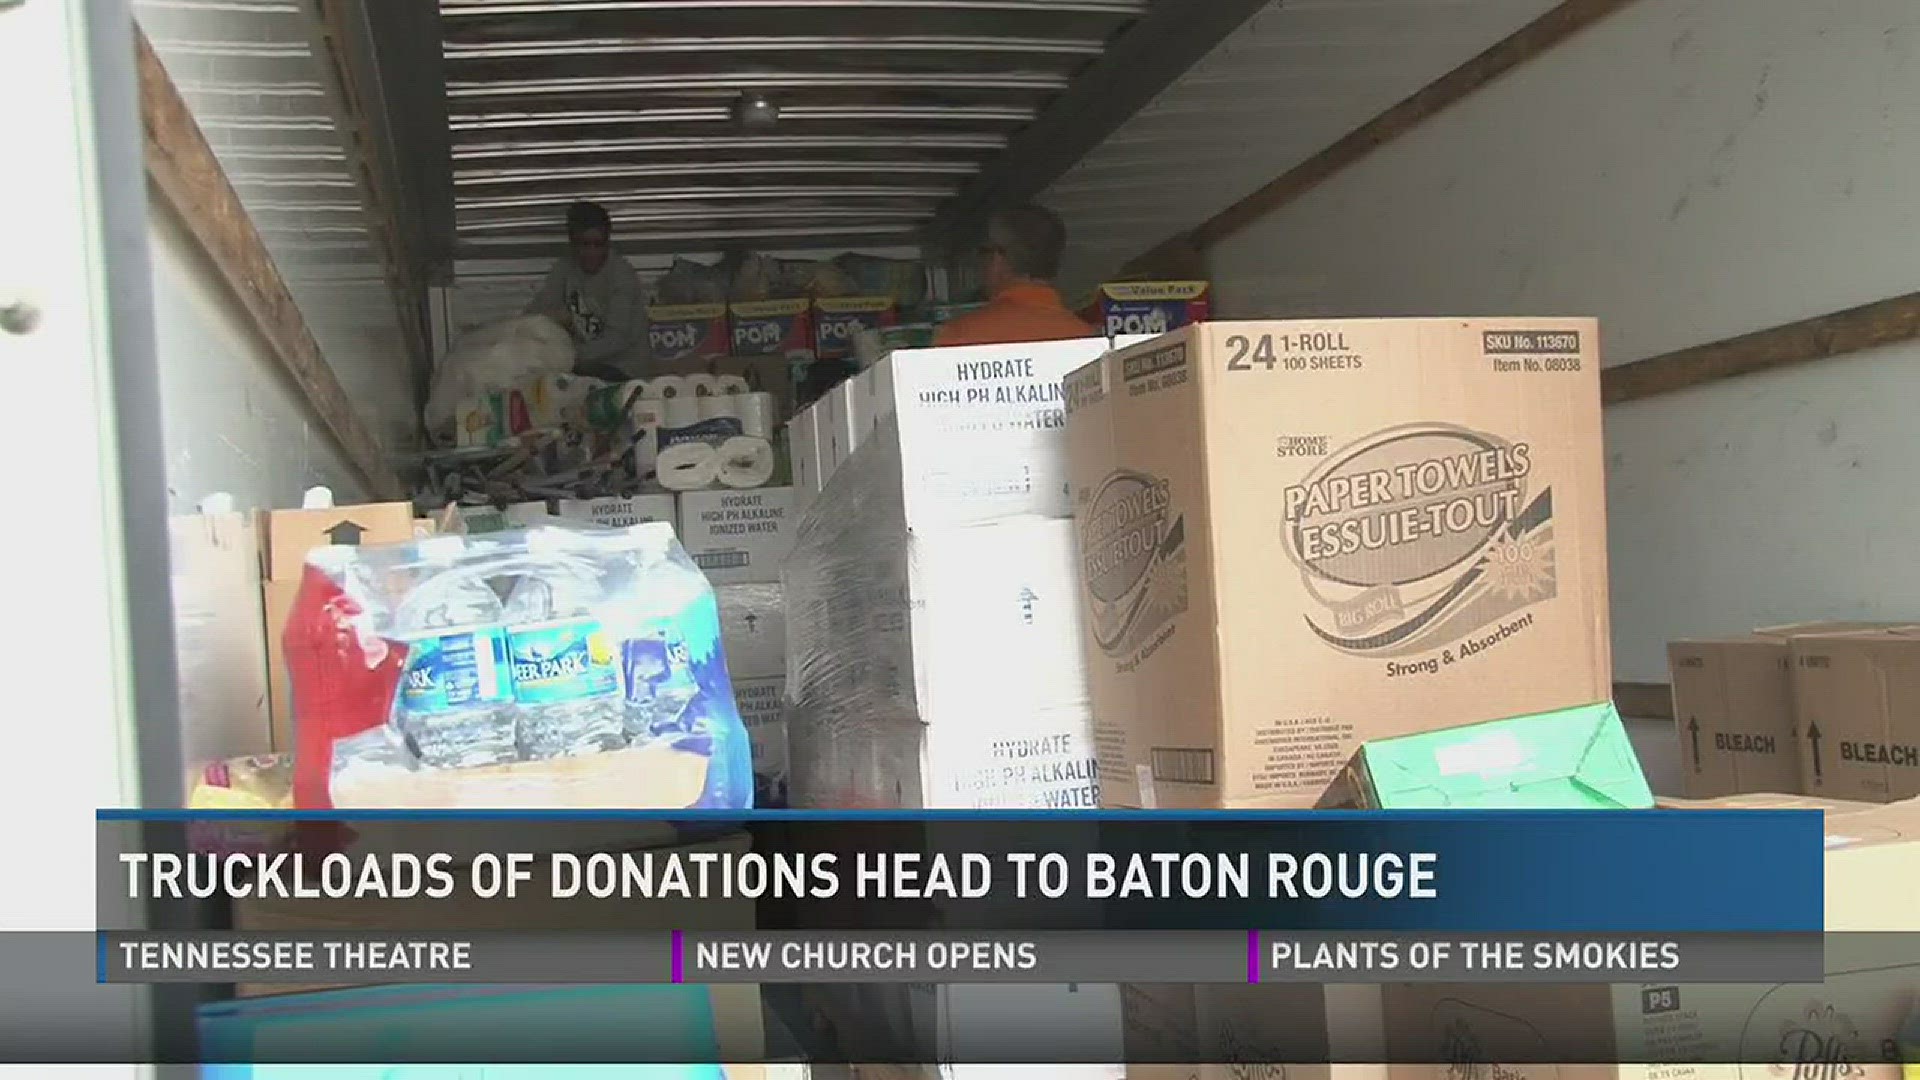 Donations head to Baton Rouge